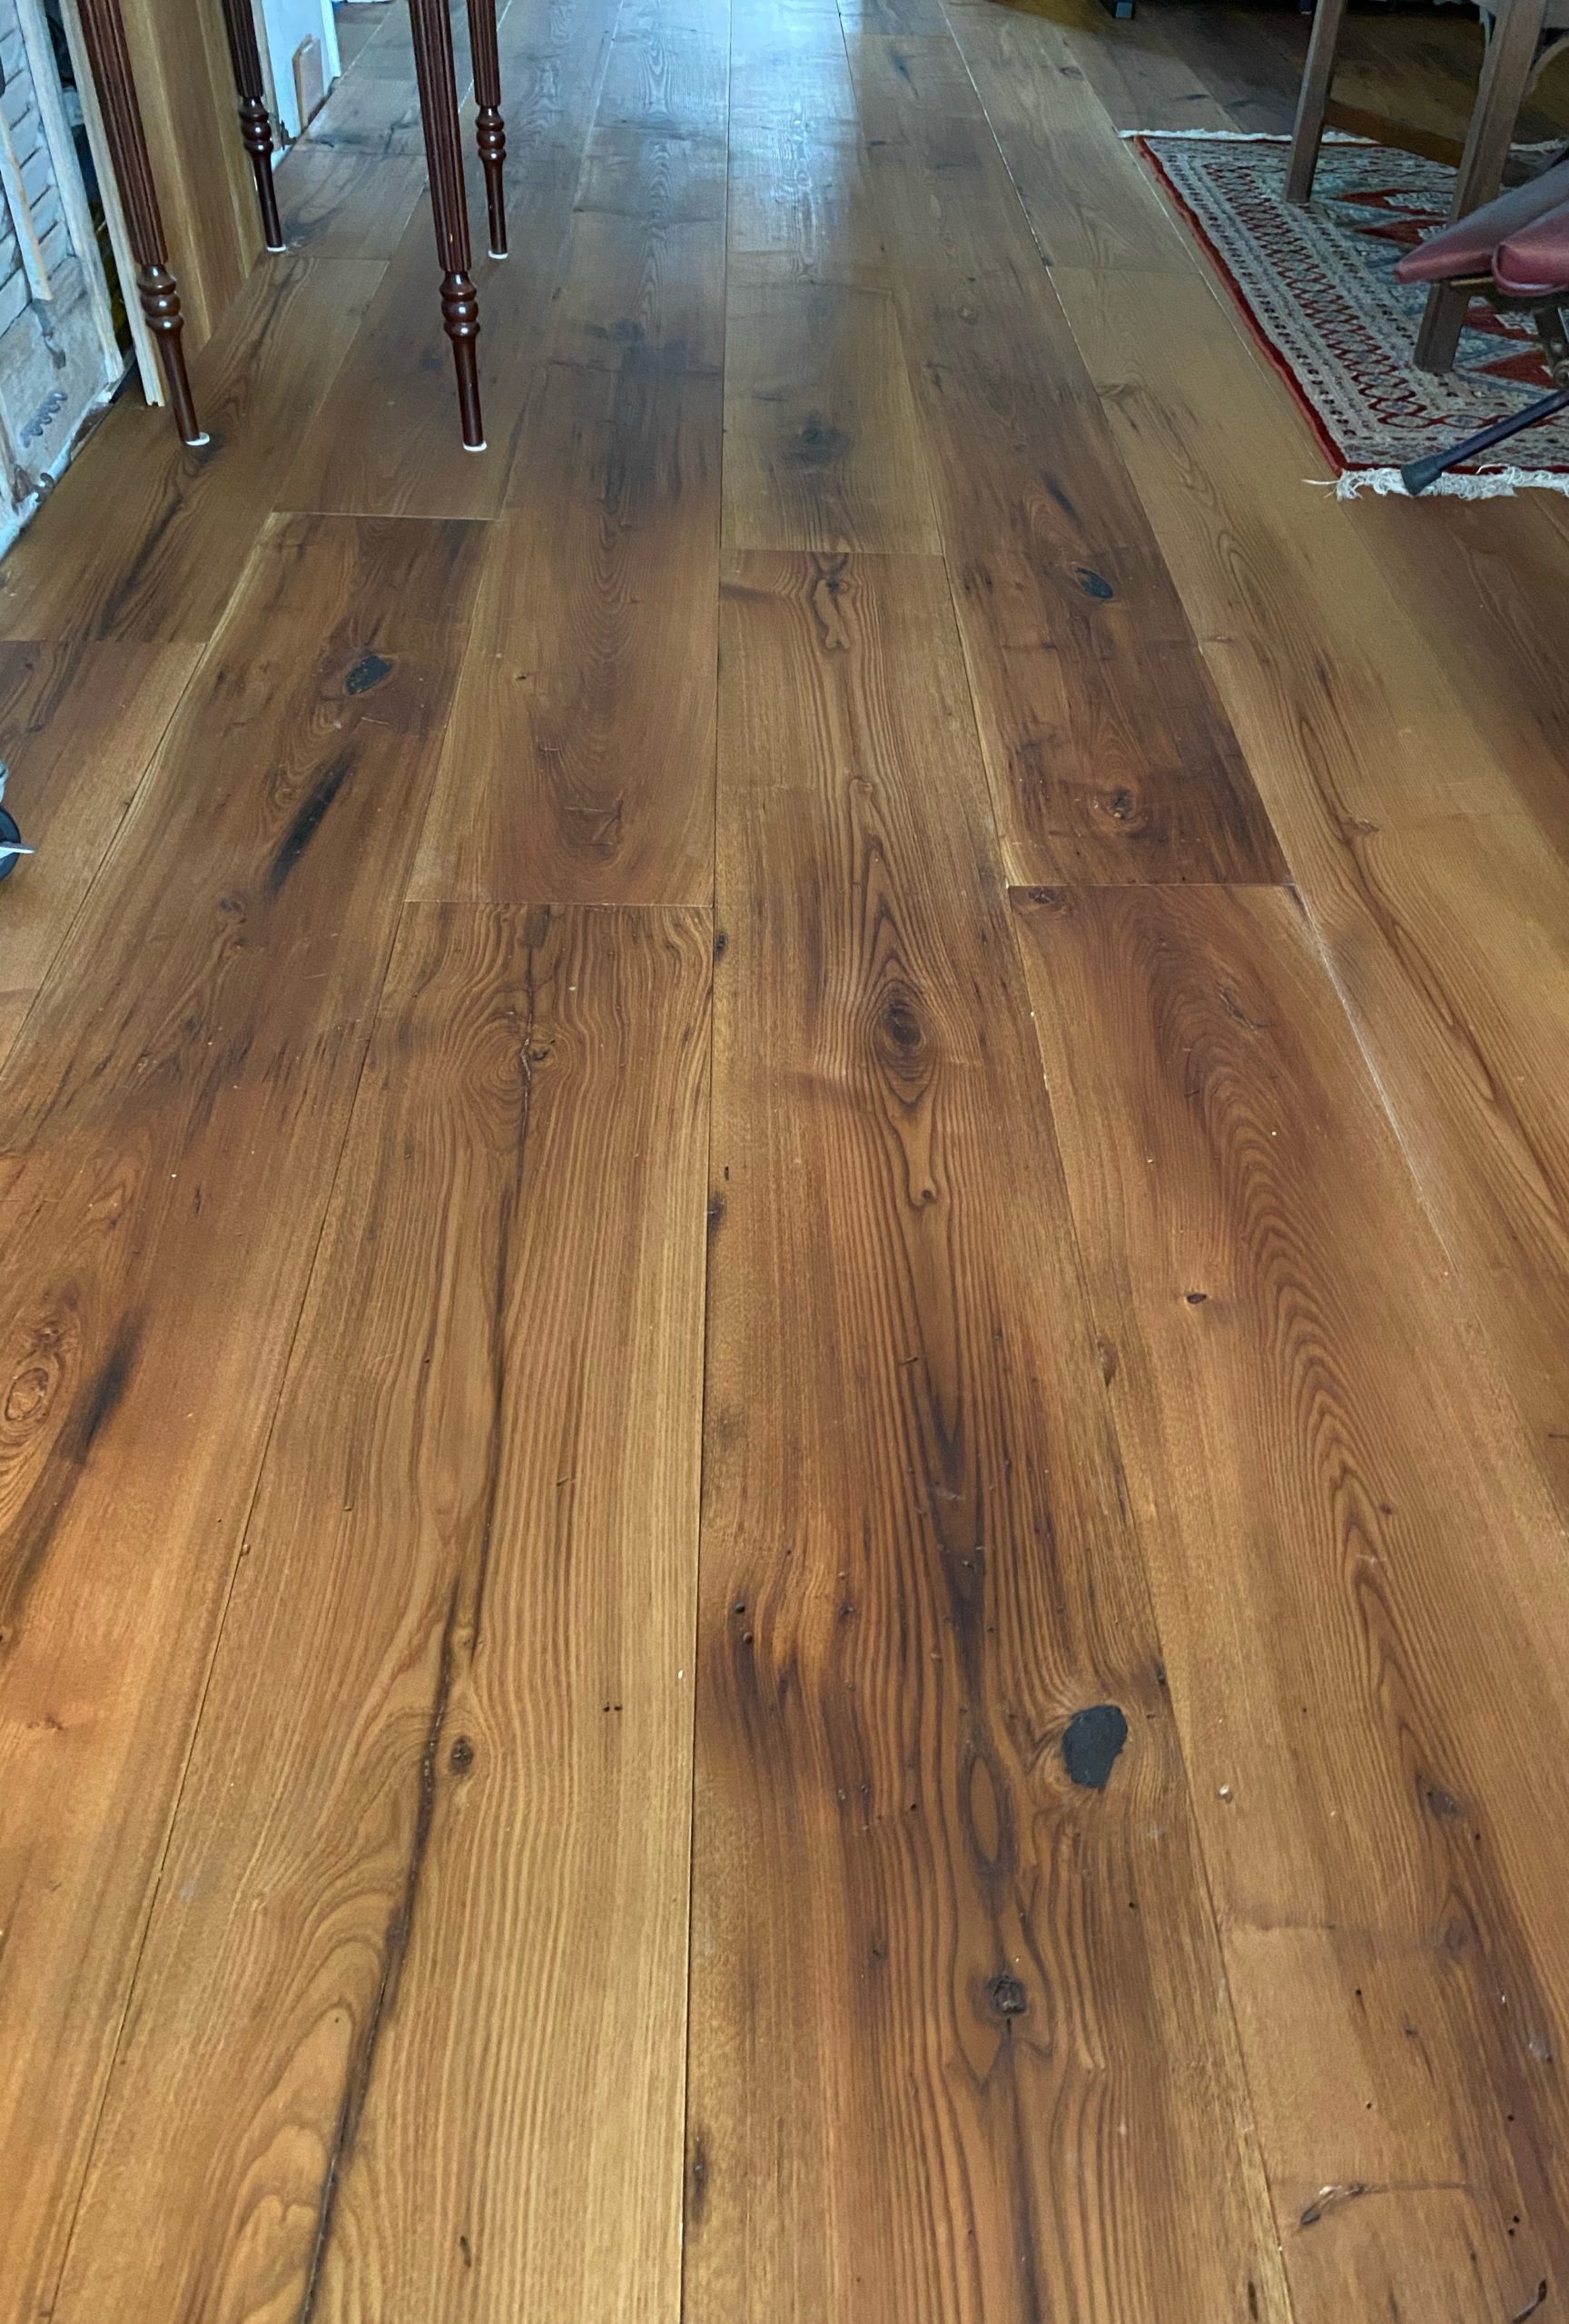 Wide Plank Prefinished Engineered Antique Reclaimed Wormy Chestnut Flooring